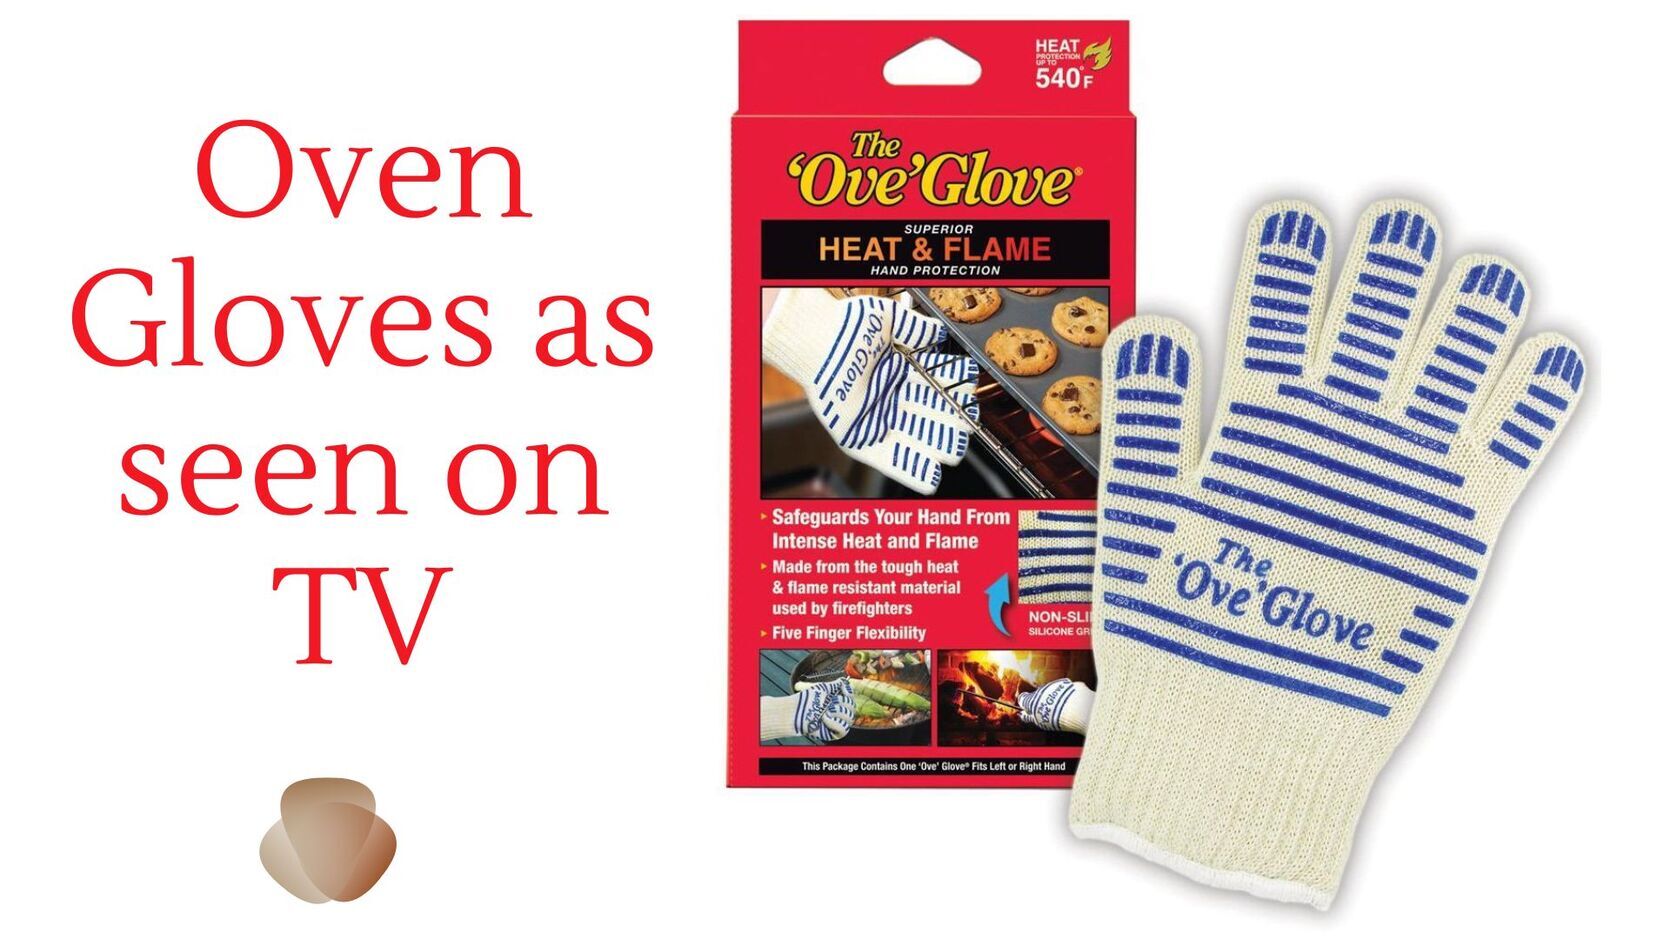 Oven-Gloves-as-seen-on-TV